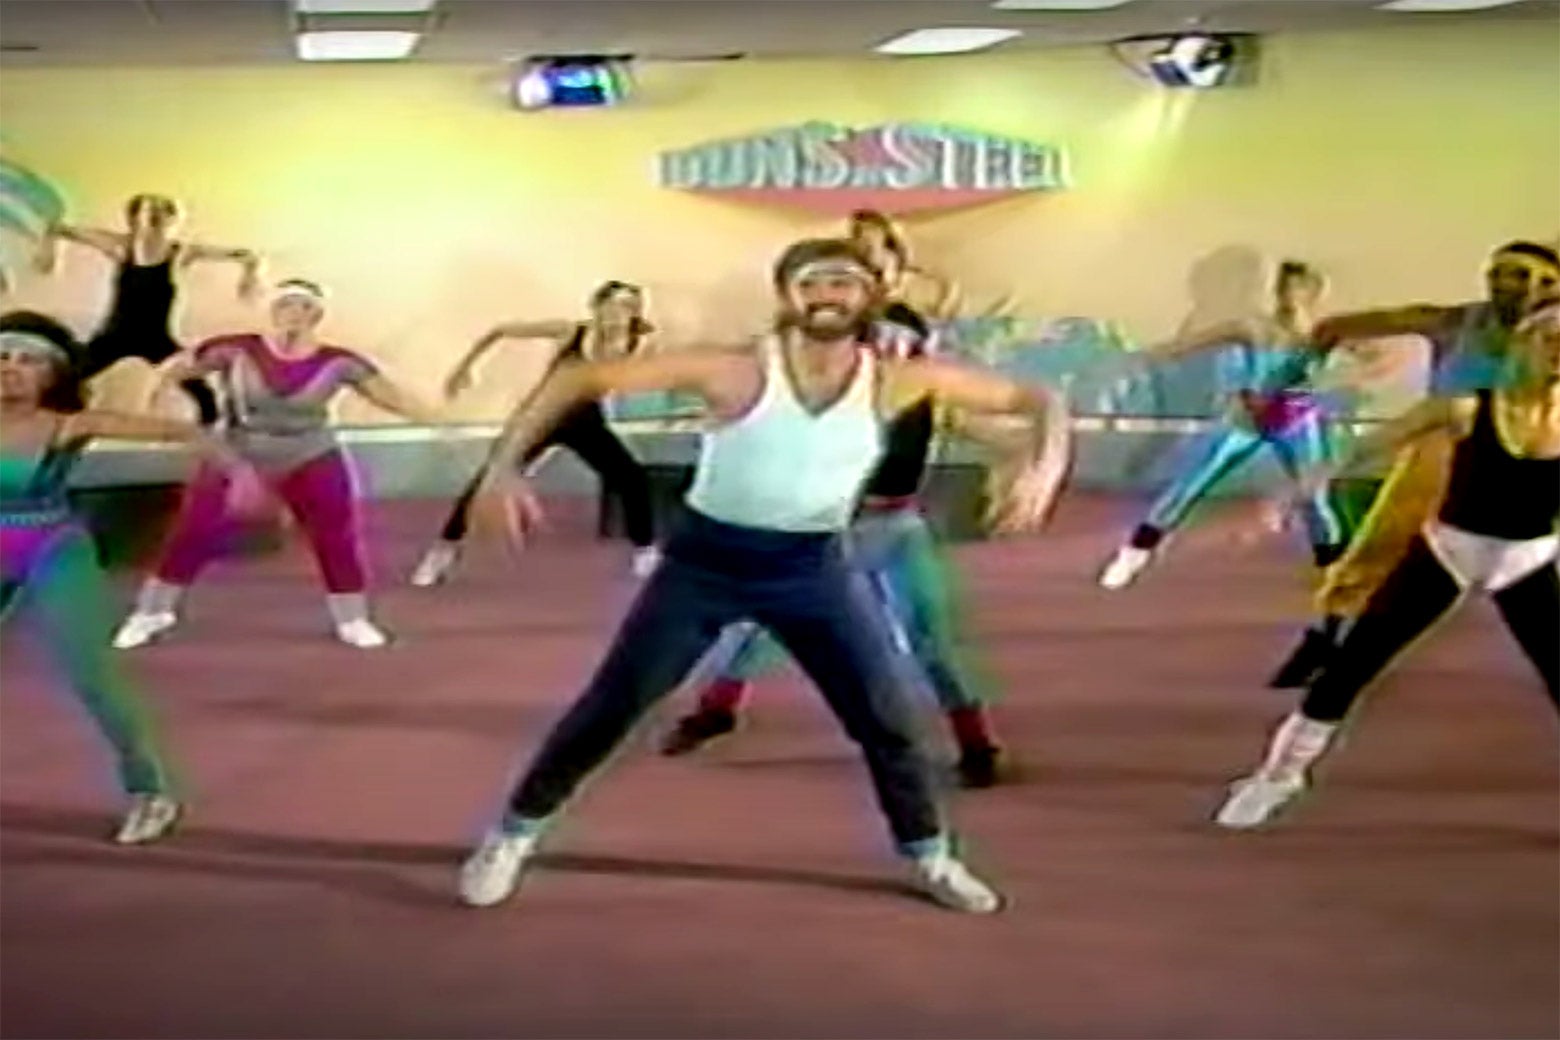 A still from the 1980s workout video Buns of Steel with several people exercising.